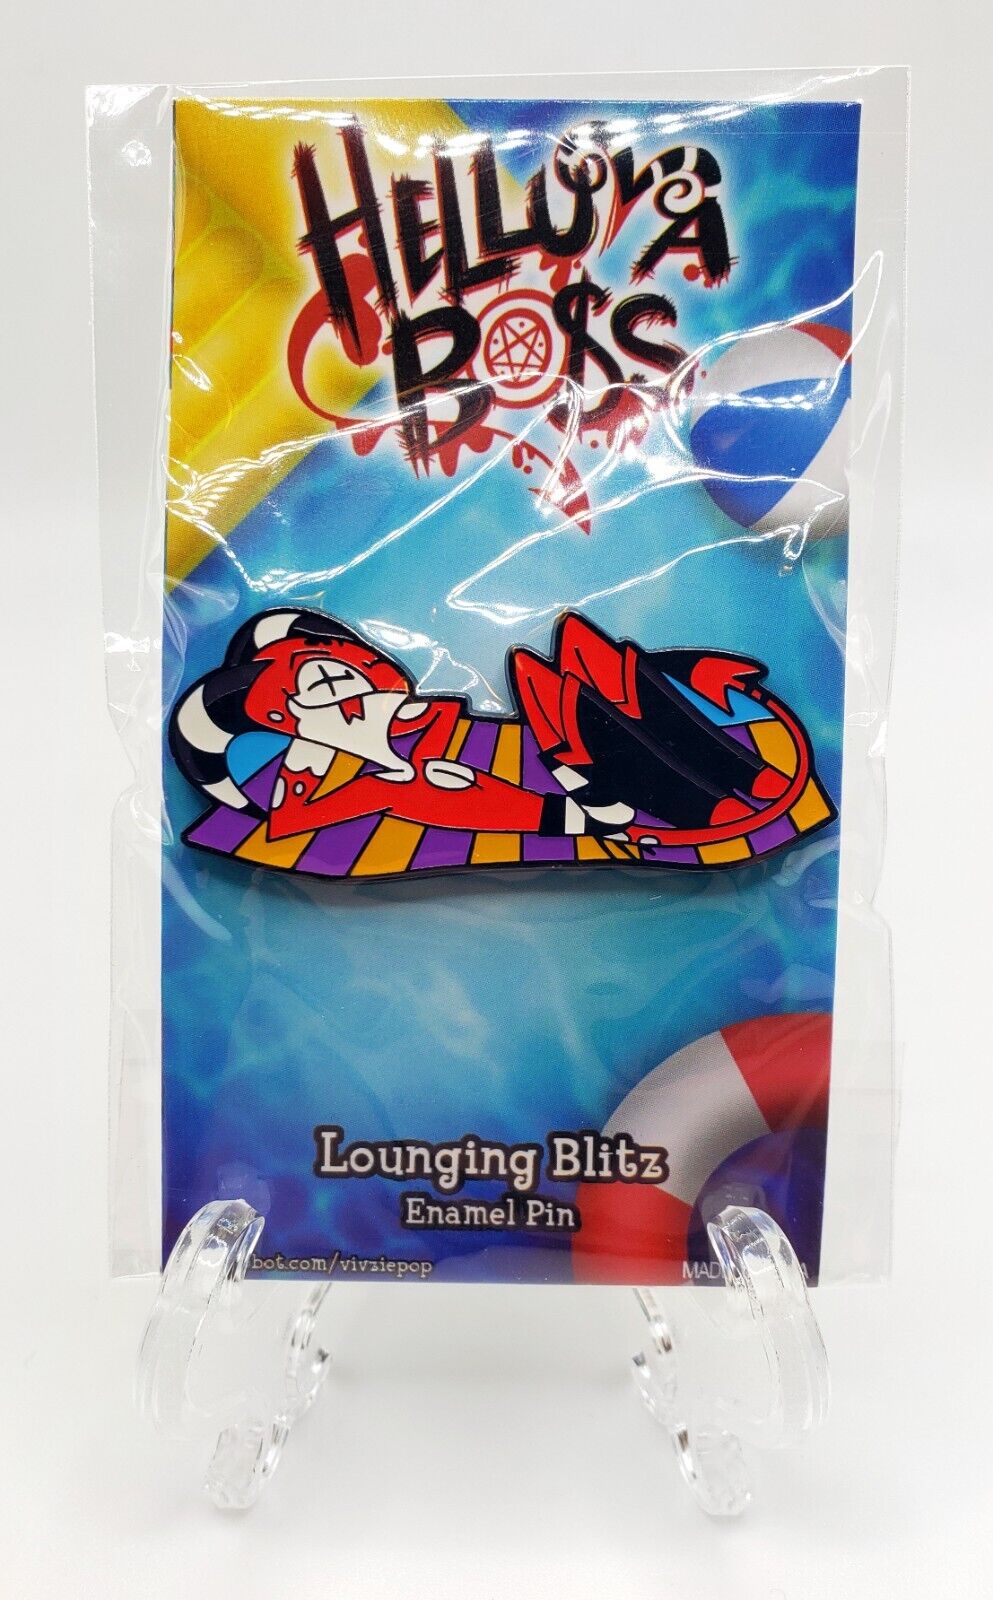 Helluva Boss Lounging Blitz Enamel Pin - LIMITED EDITION - SOLD OUT